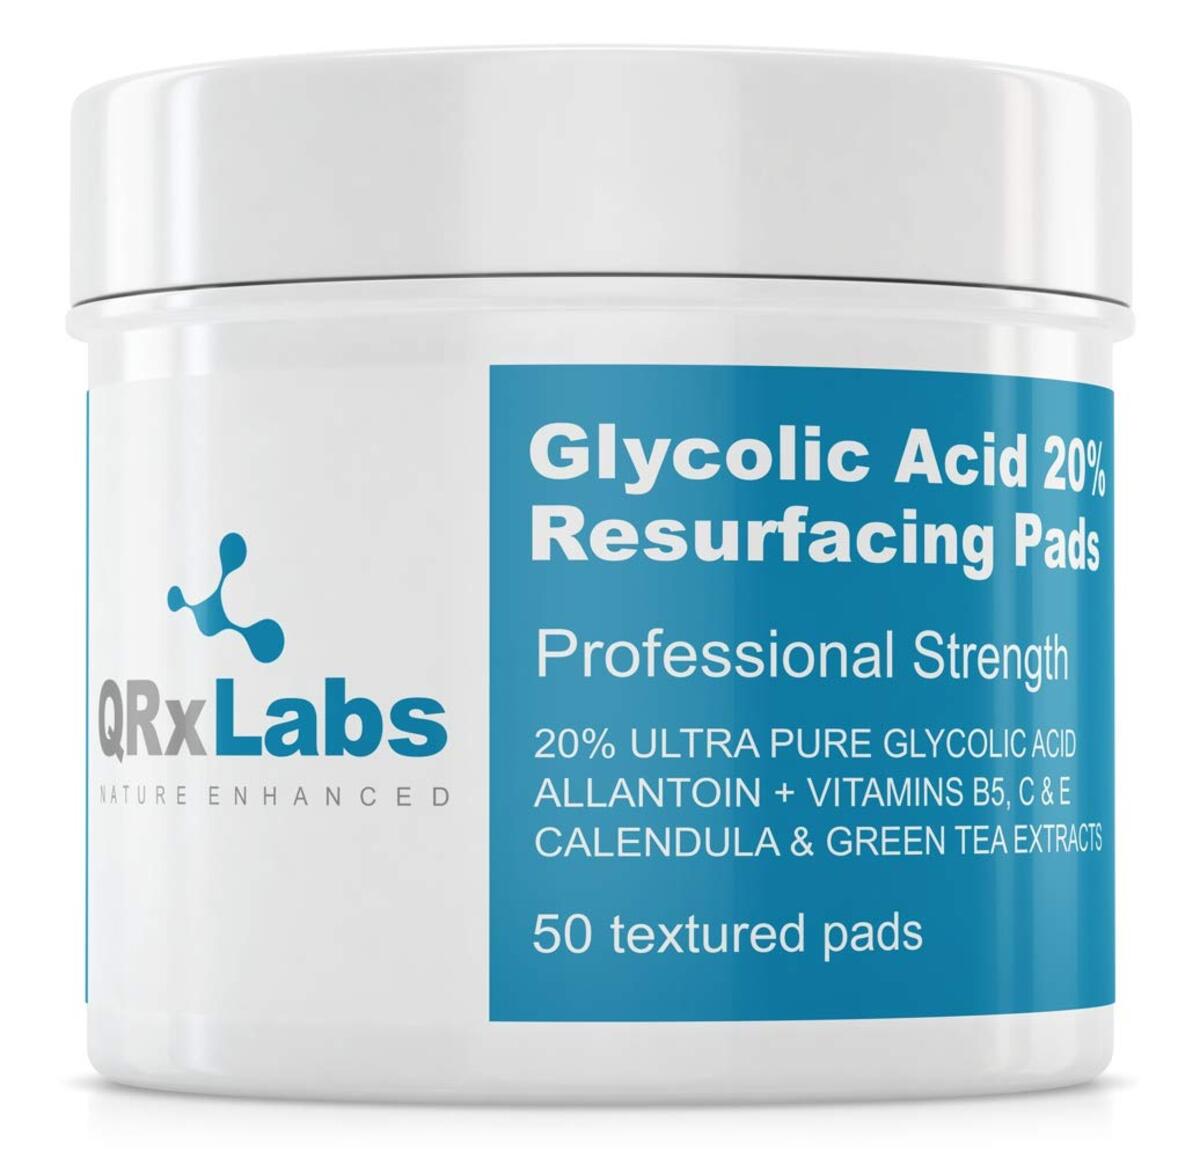 yGNXvXցzQRxLabs Glycolic Acid 20% Resurfacing Pads for Face & Body with Vitamins B5, C & E, Green Tea, Allantoin - Exfoliates Surface Skin and Reduces Fine Lines and Wrinkles - L[A[{@r^~@B5@C & E@Β@EBN